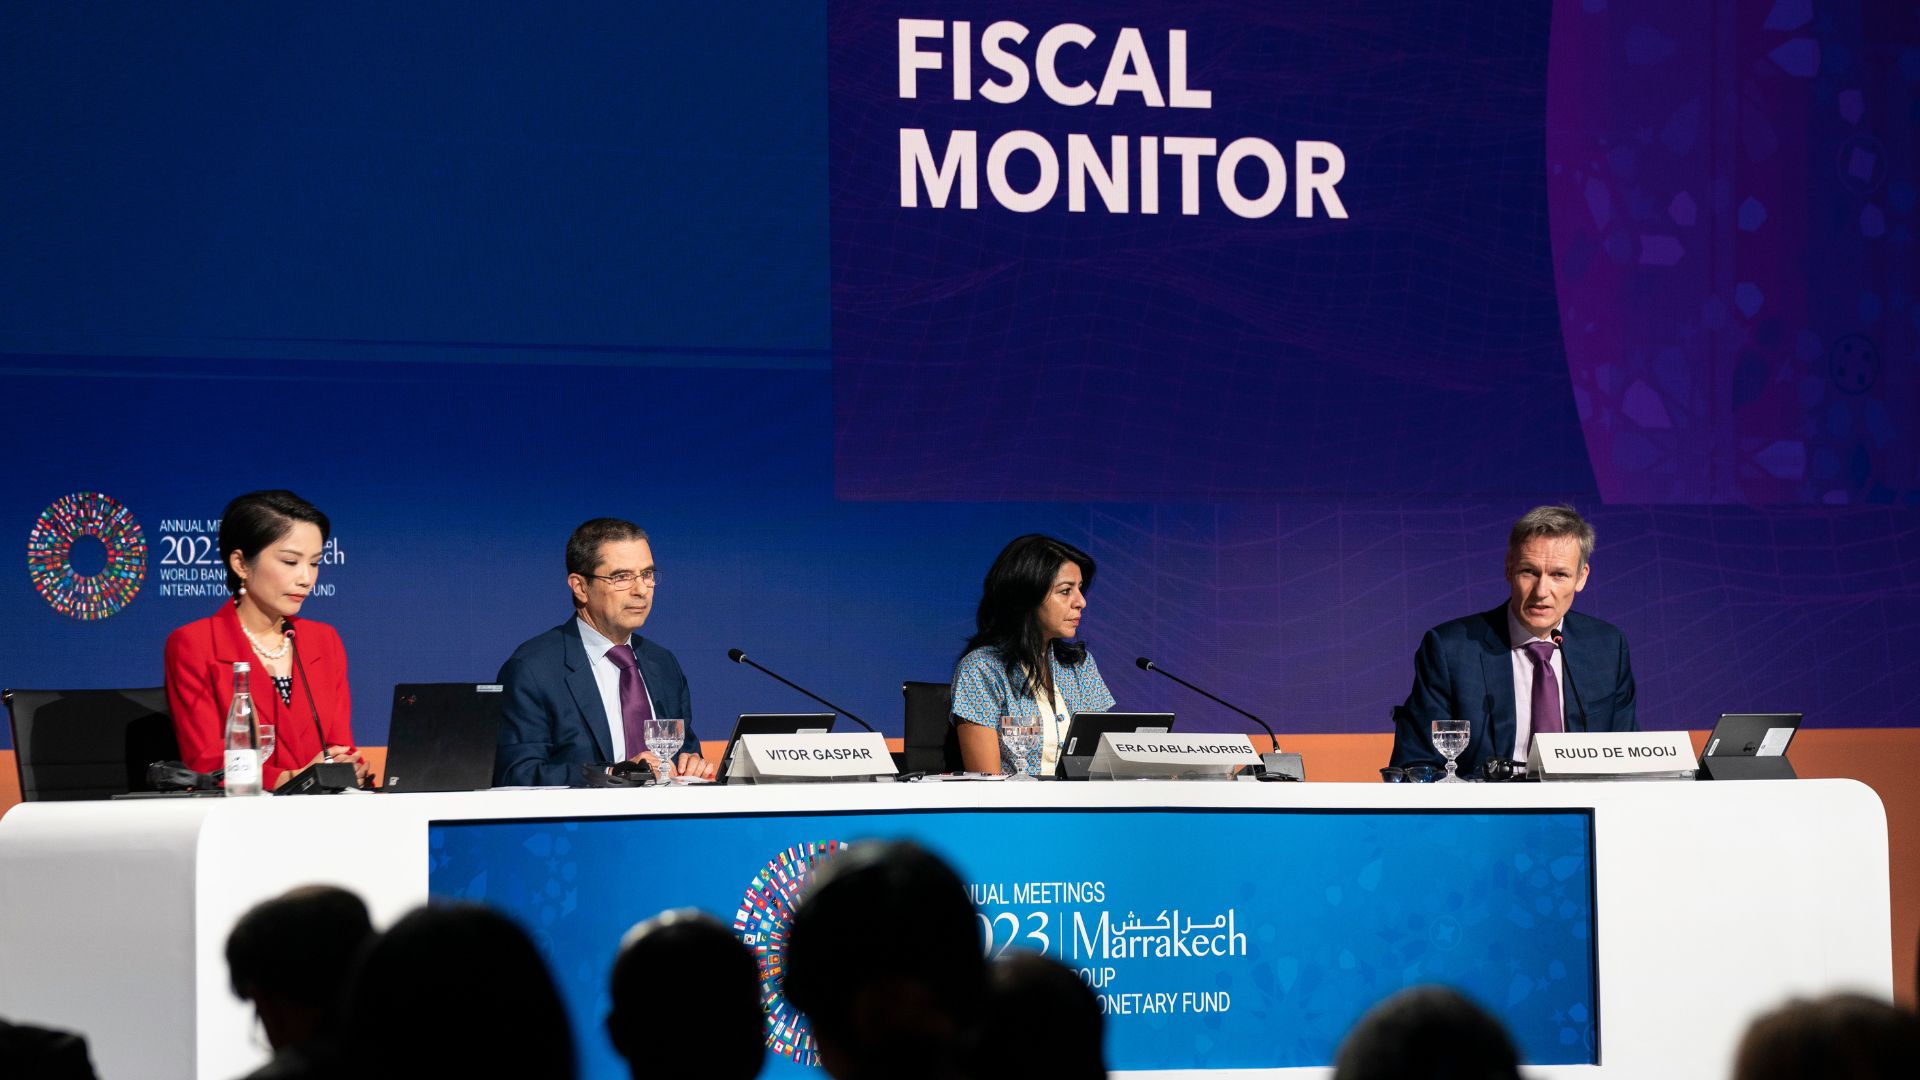 Fiscal Monitor Annual Meetings 2023